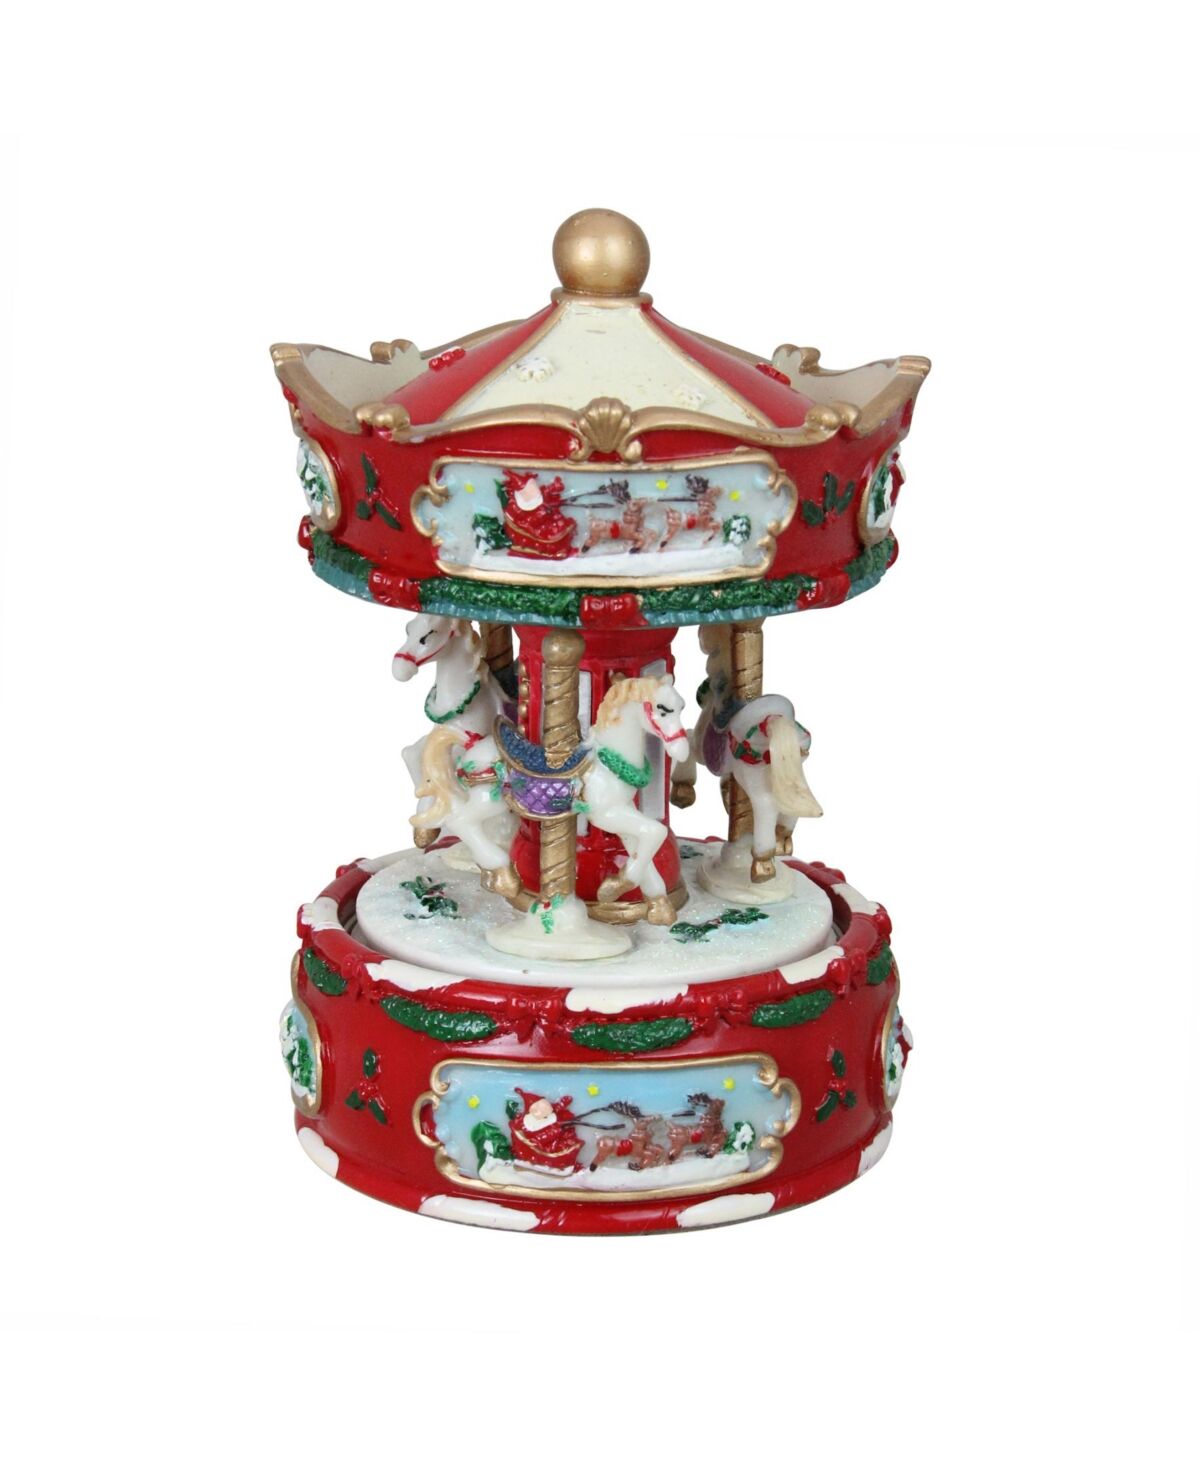 Northlight Animated Musical Carousel with Horses Christmas Music Box Table top Decor - Red